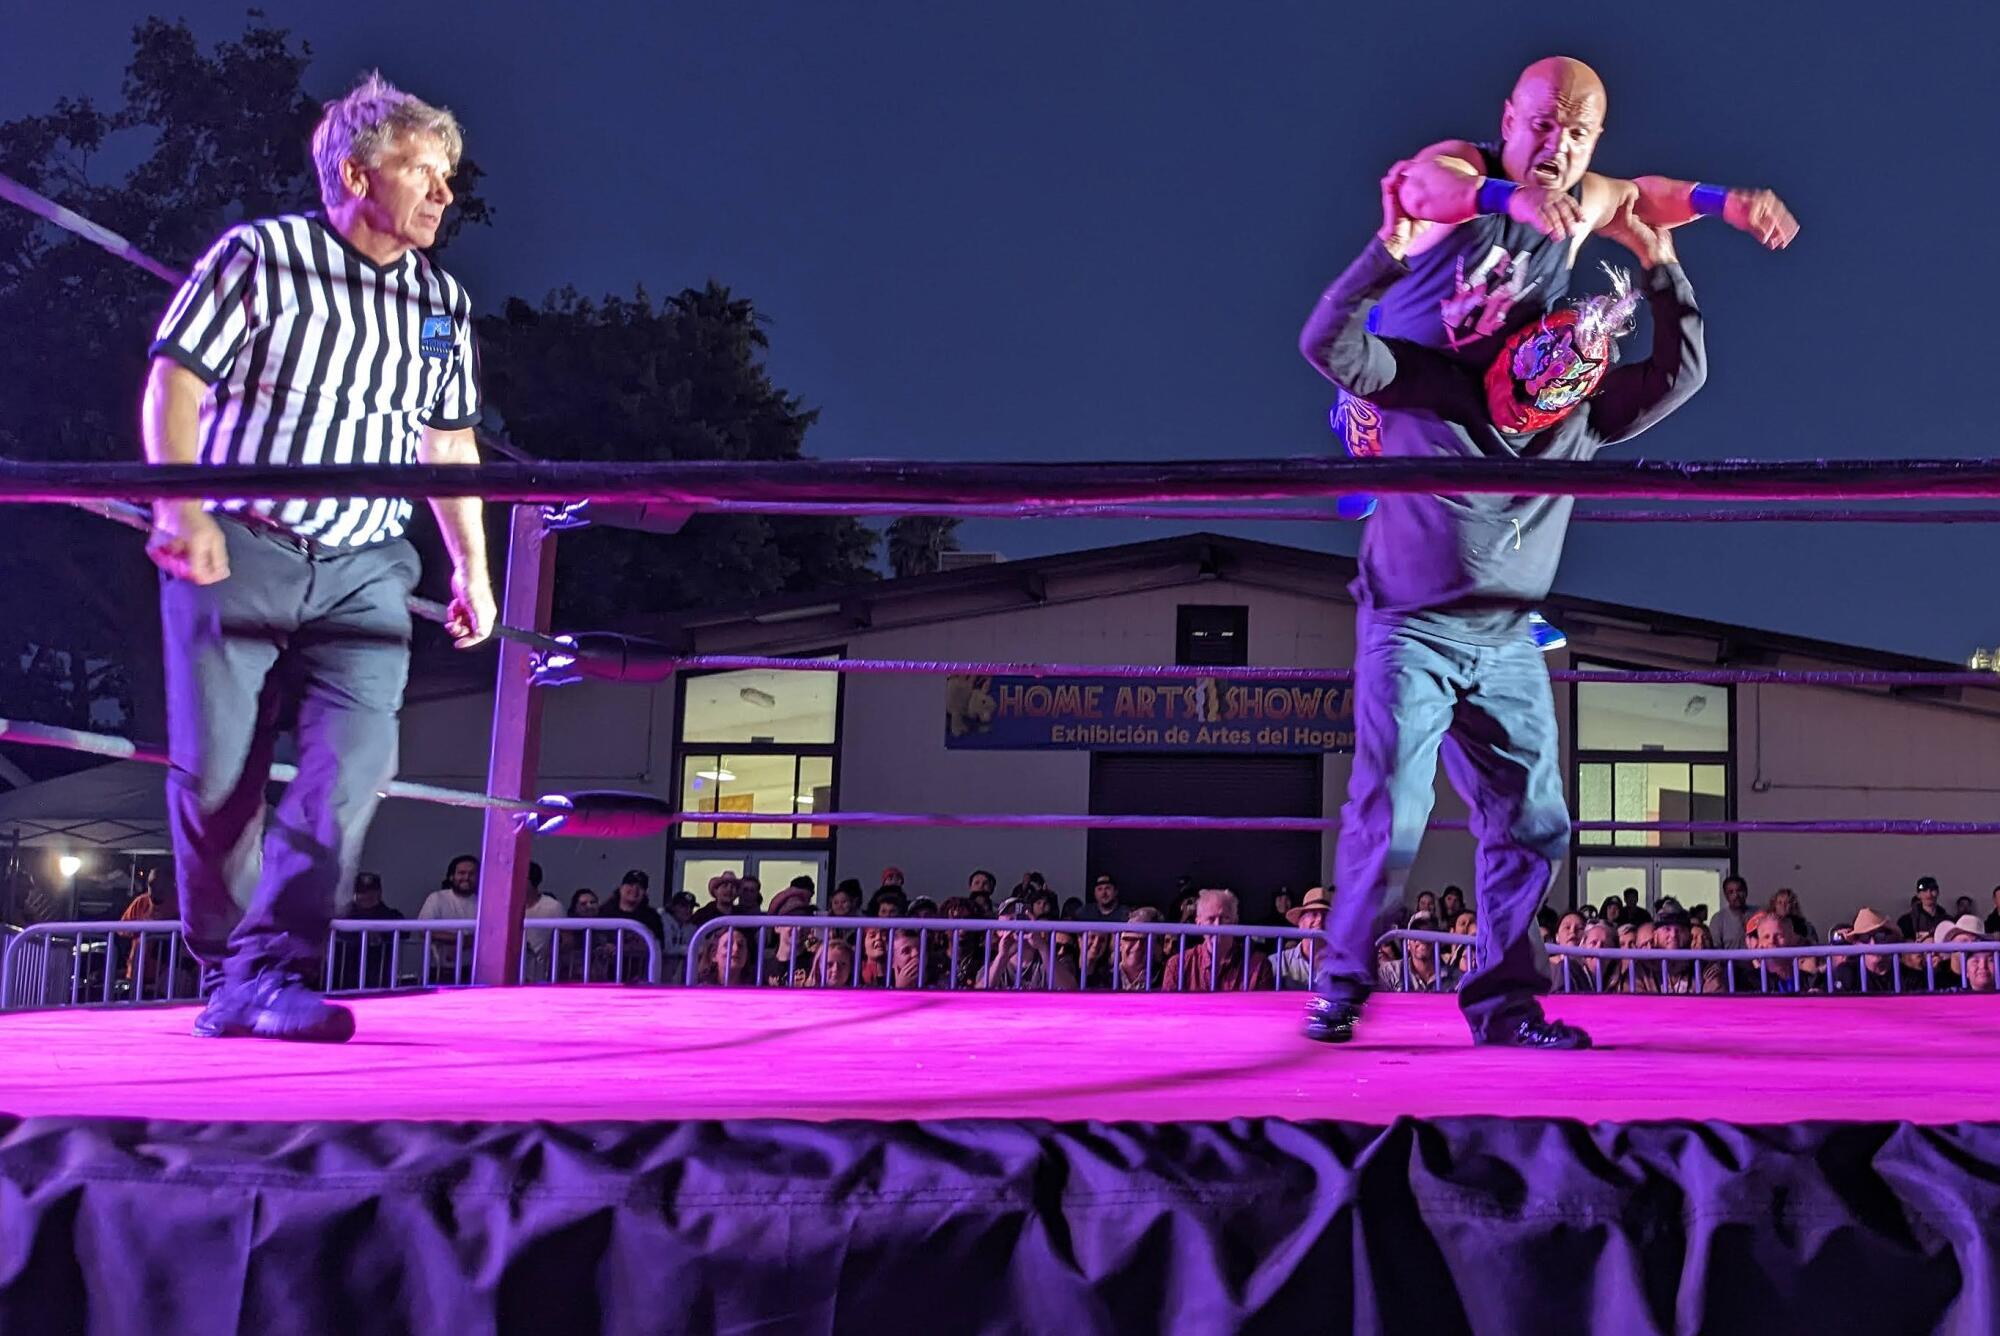 A person is on the back of another person as a referee watches in a ring.